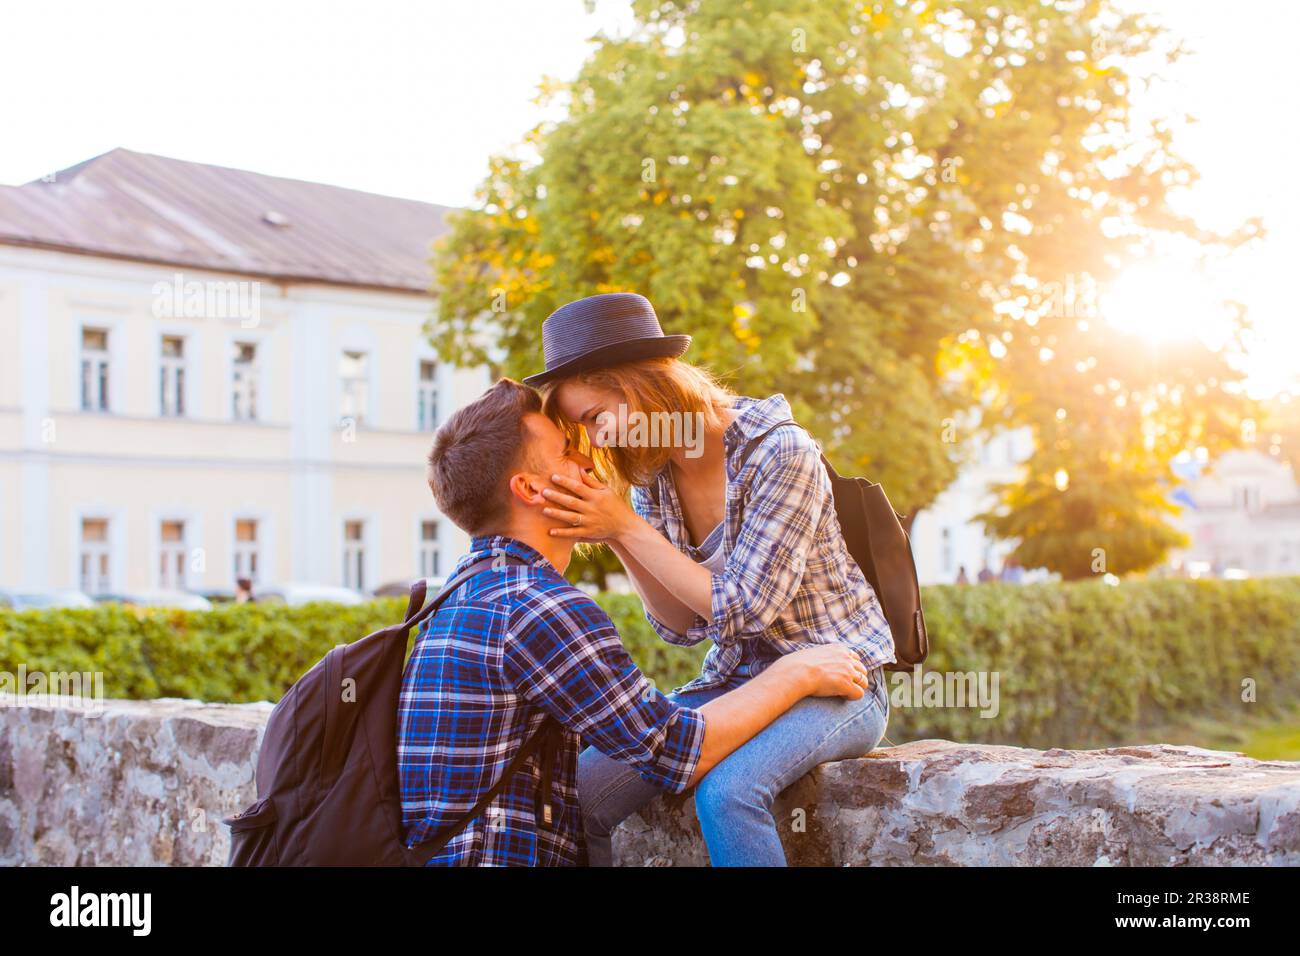 Portrait of romantic couple sitting face-to-face, love Stock Photo